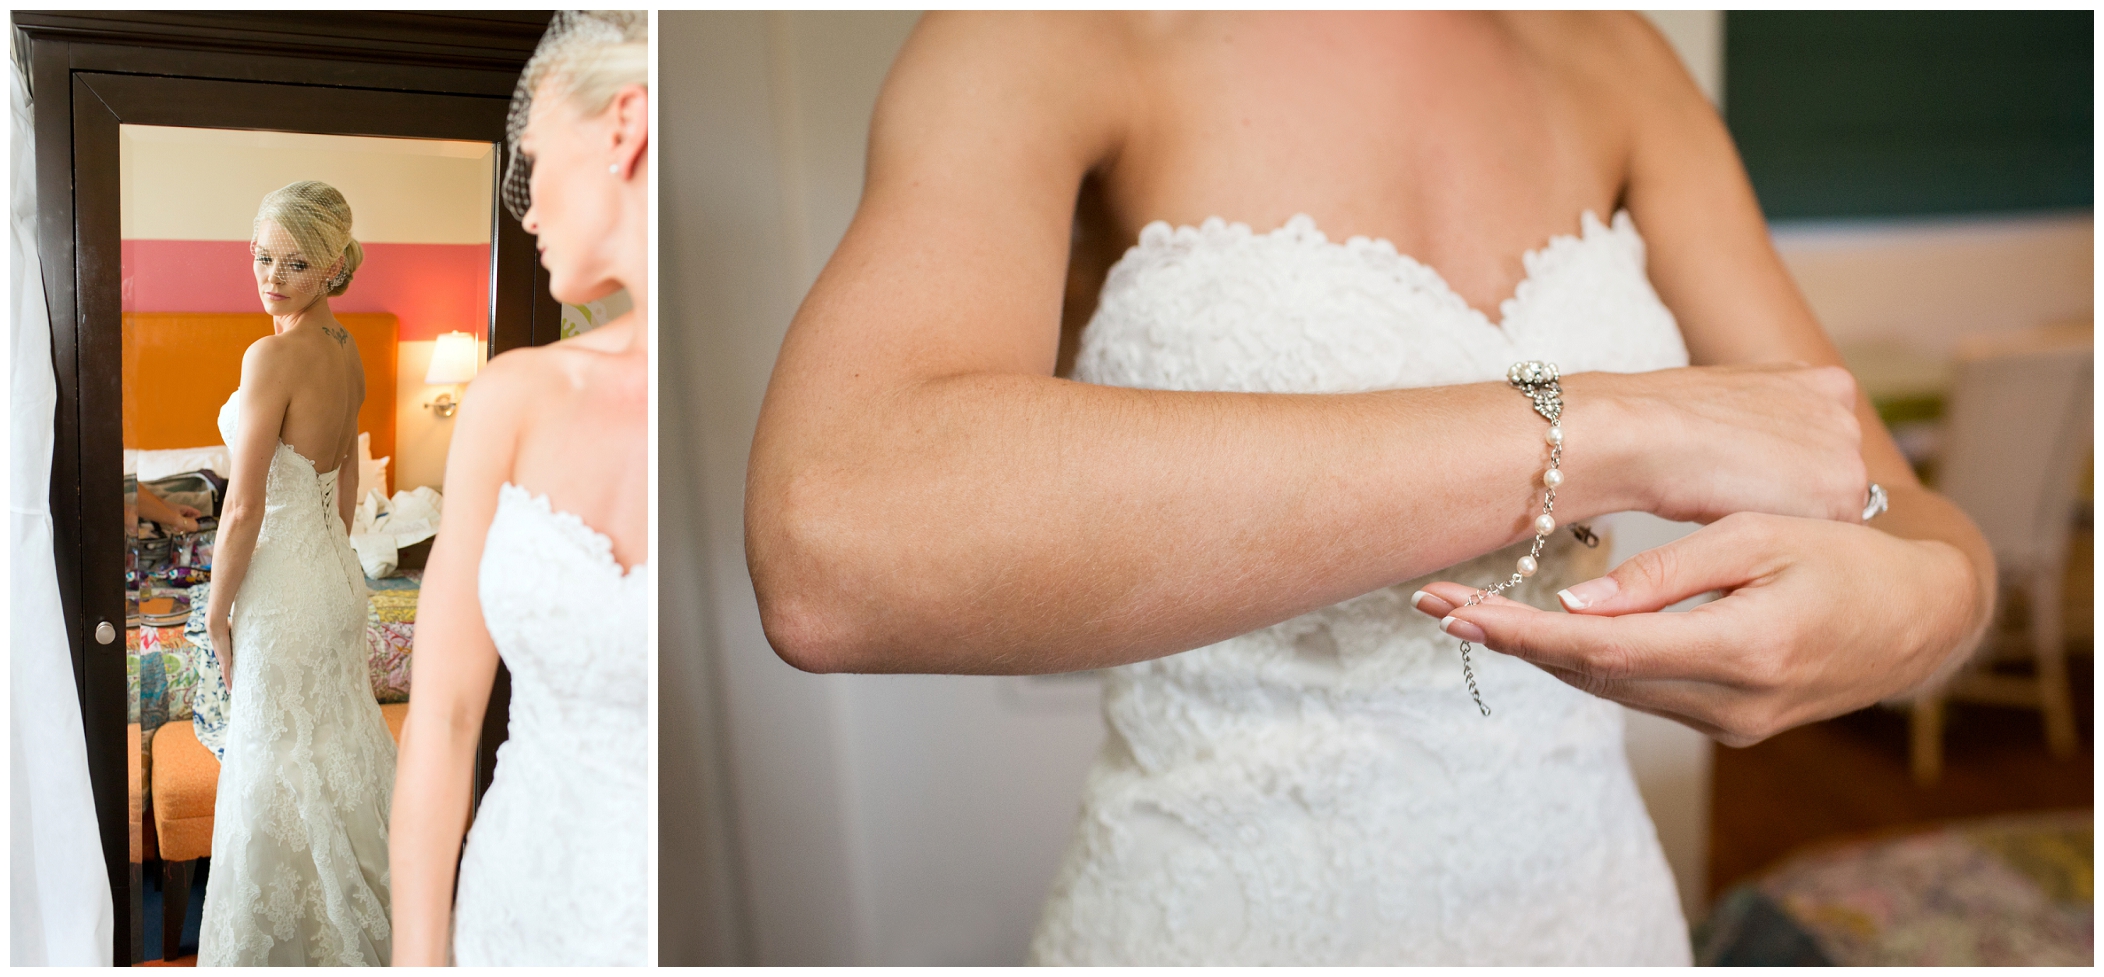 picture of a bride putting on a bracelet